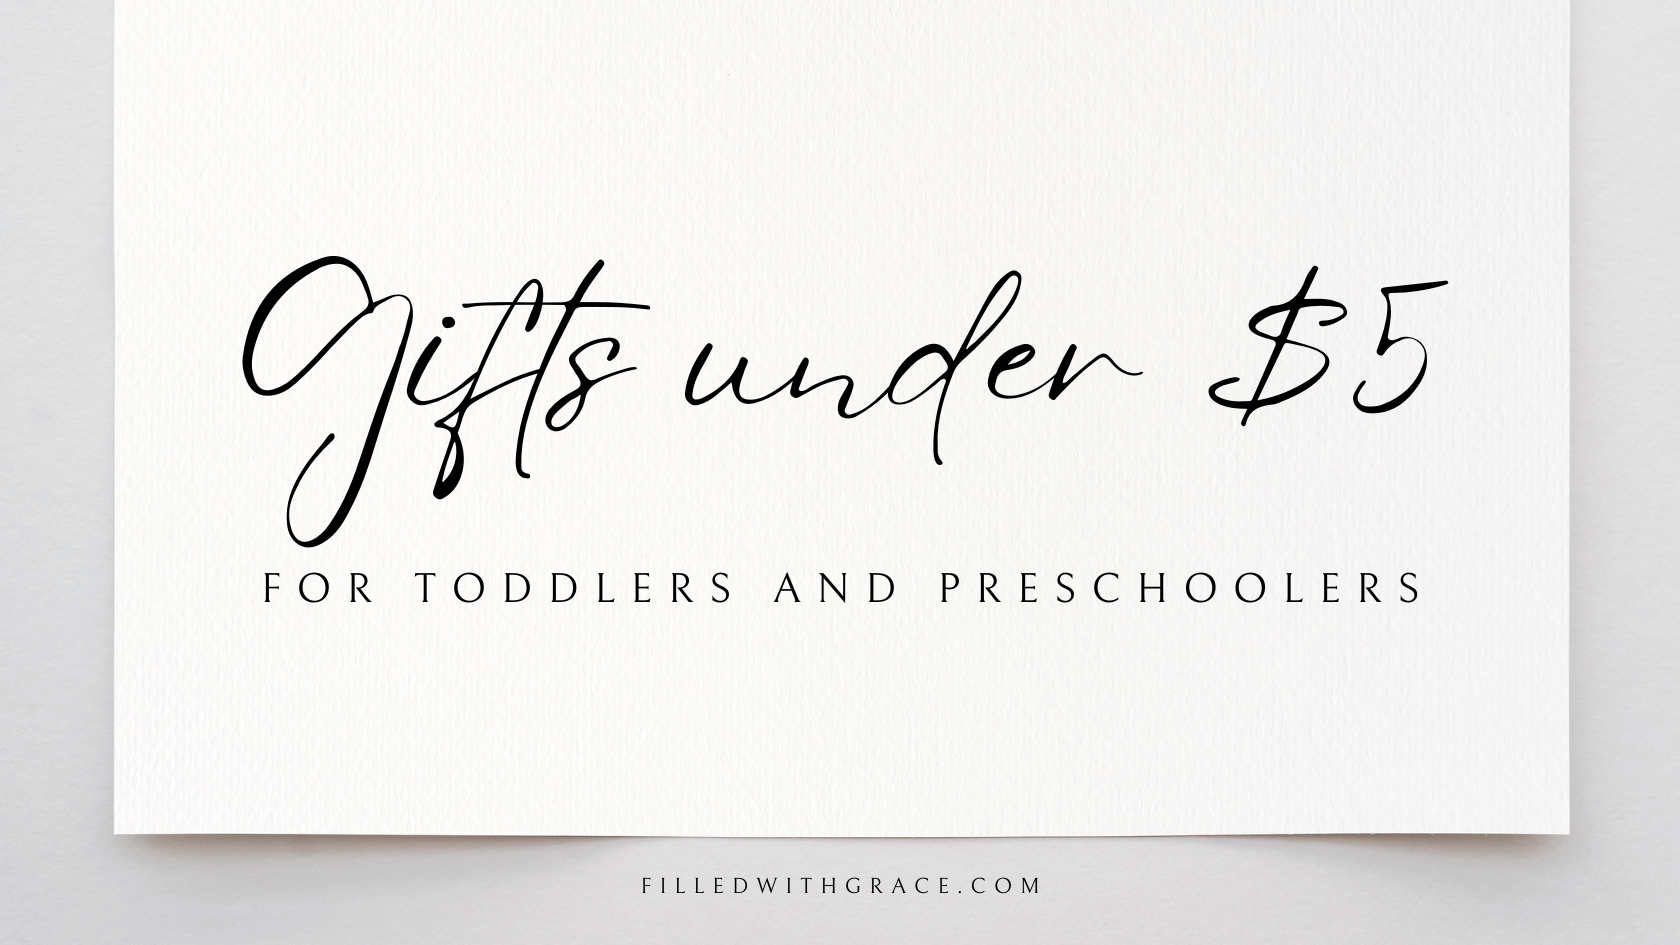 Gifts under $5 For Toddlers and Preschoolers (2-5 years old) - Motherhood, Faith